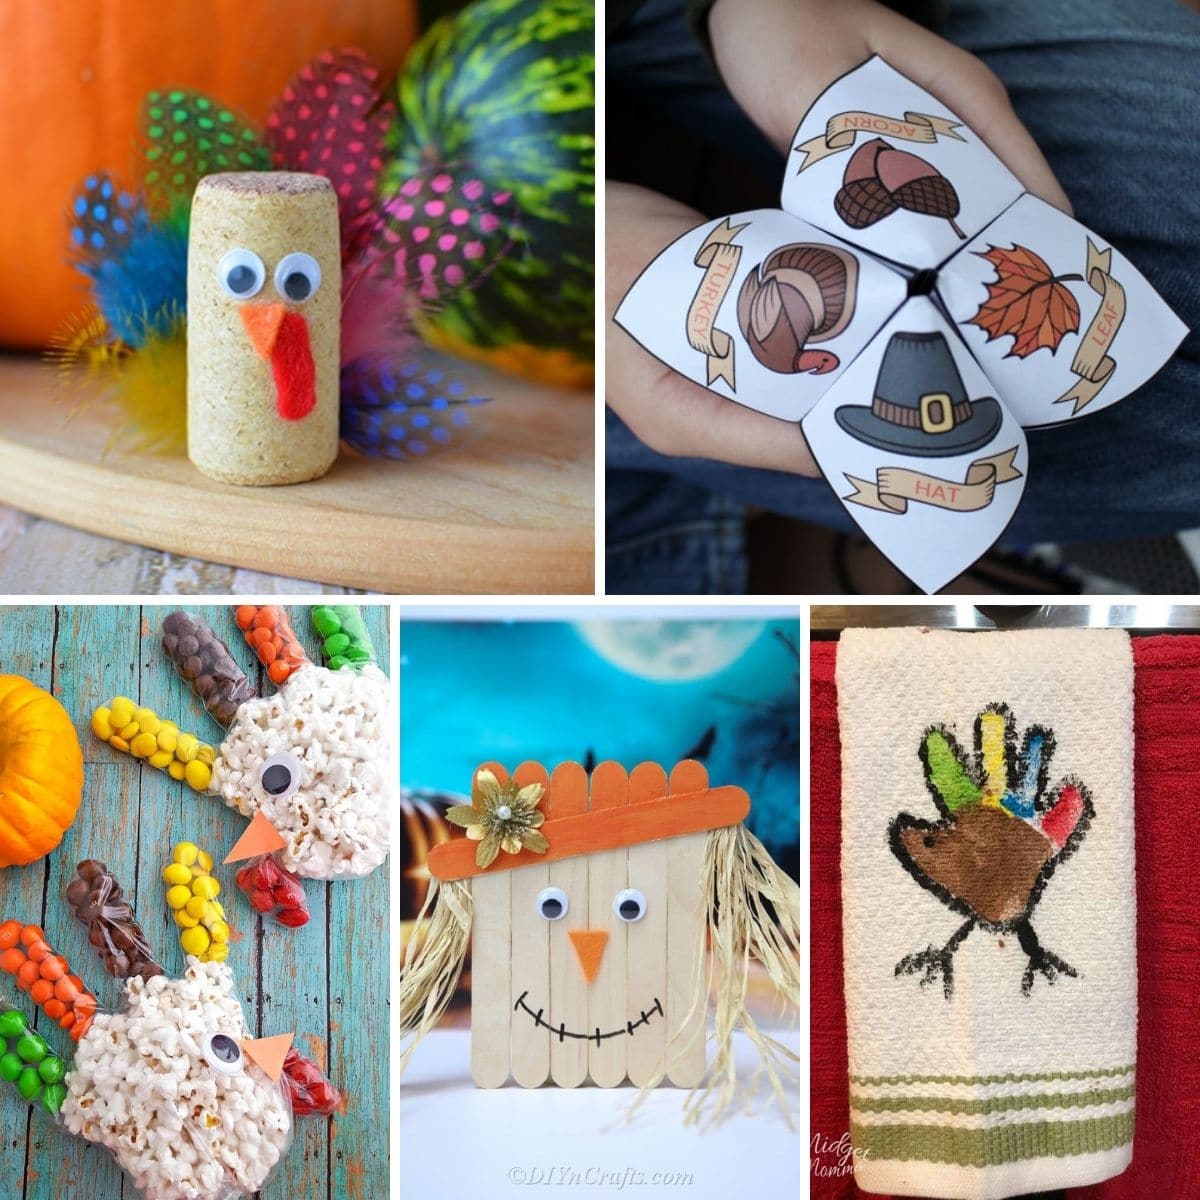 Thanksgiving Crafts For Kids: Popsicle Stick Corn